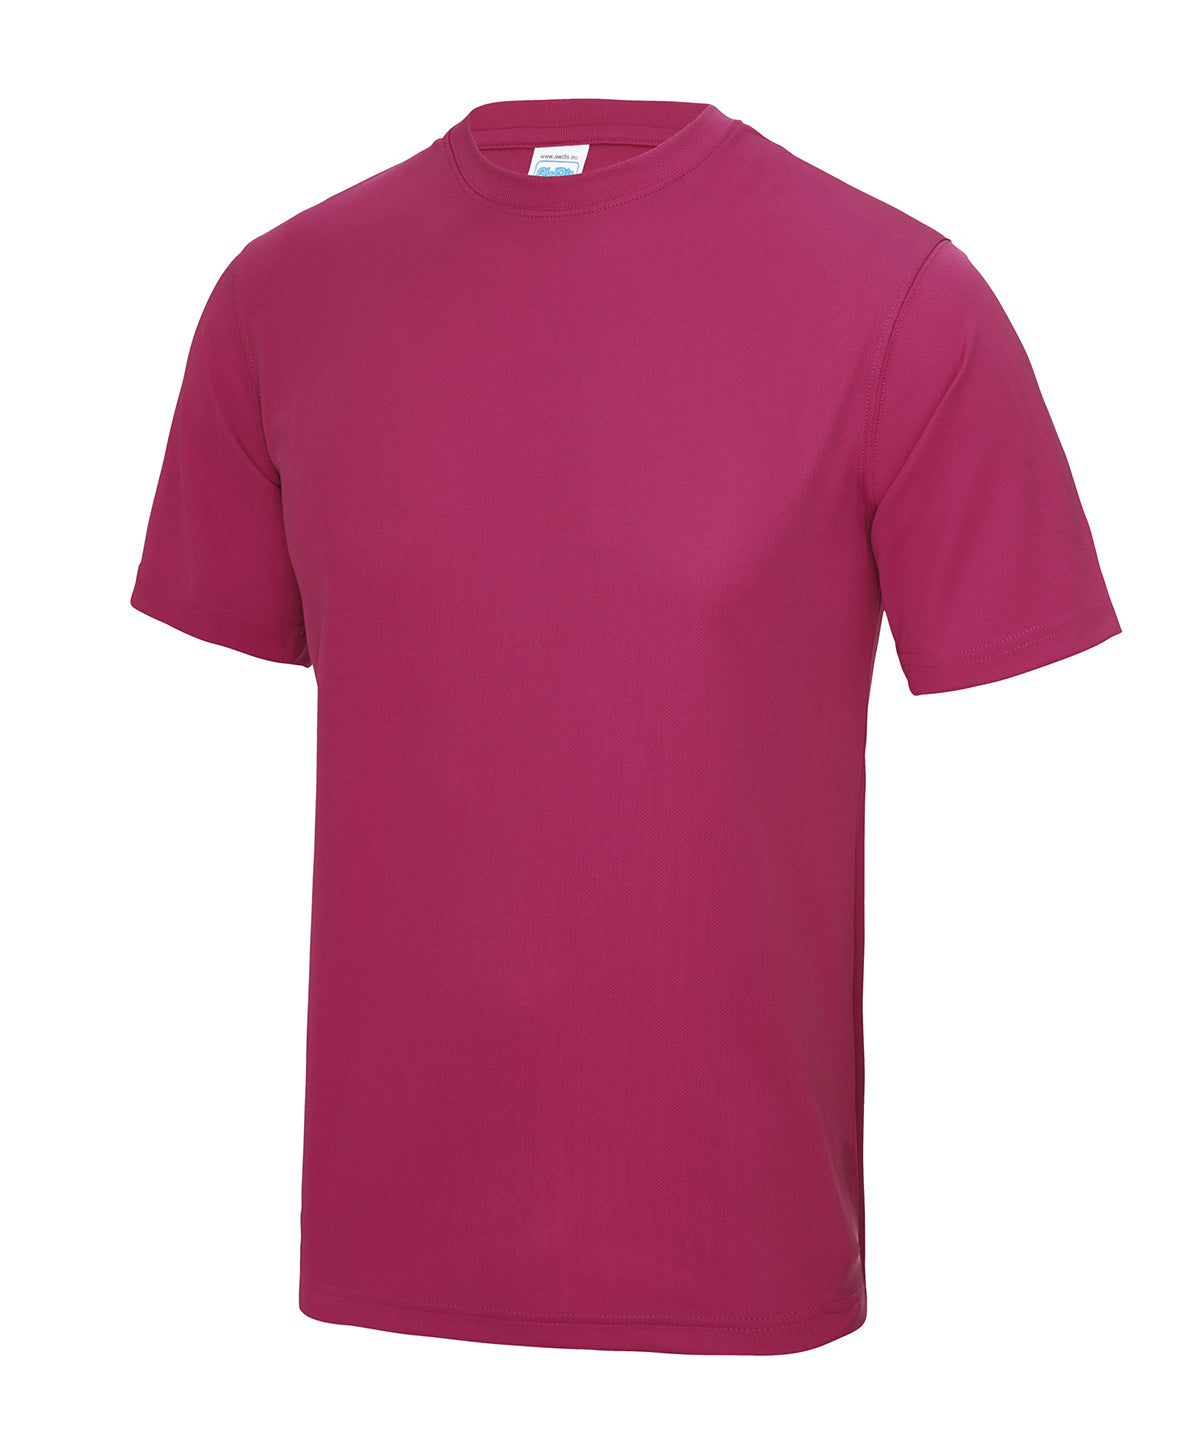 Personalised T-Shirts - Light Pink AWDis Just Cool Cool T